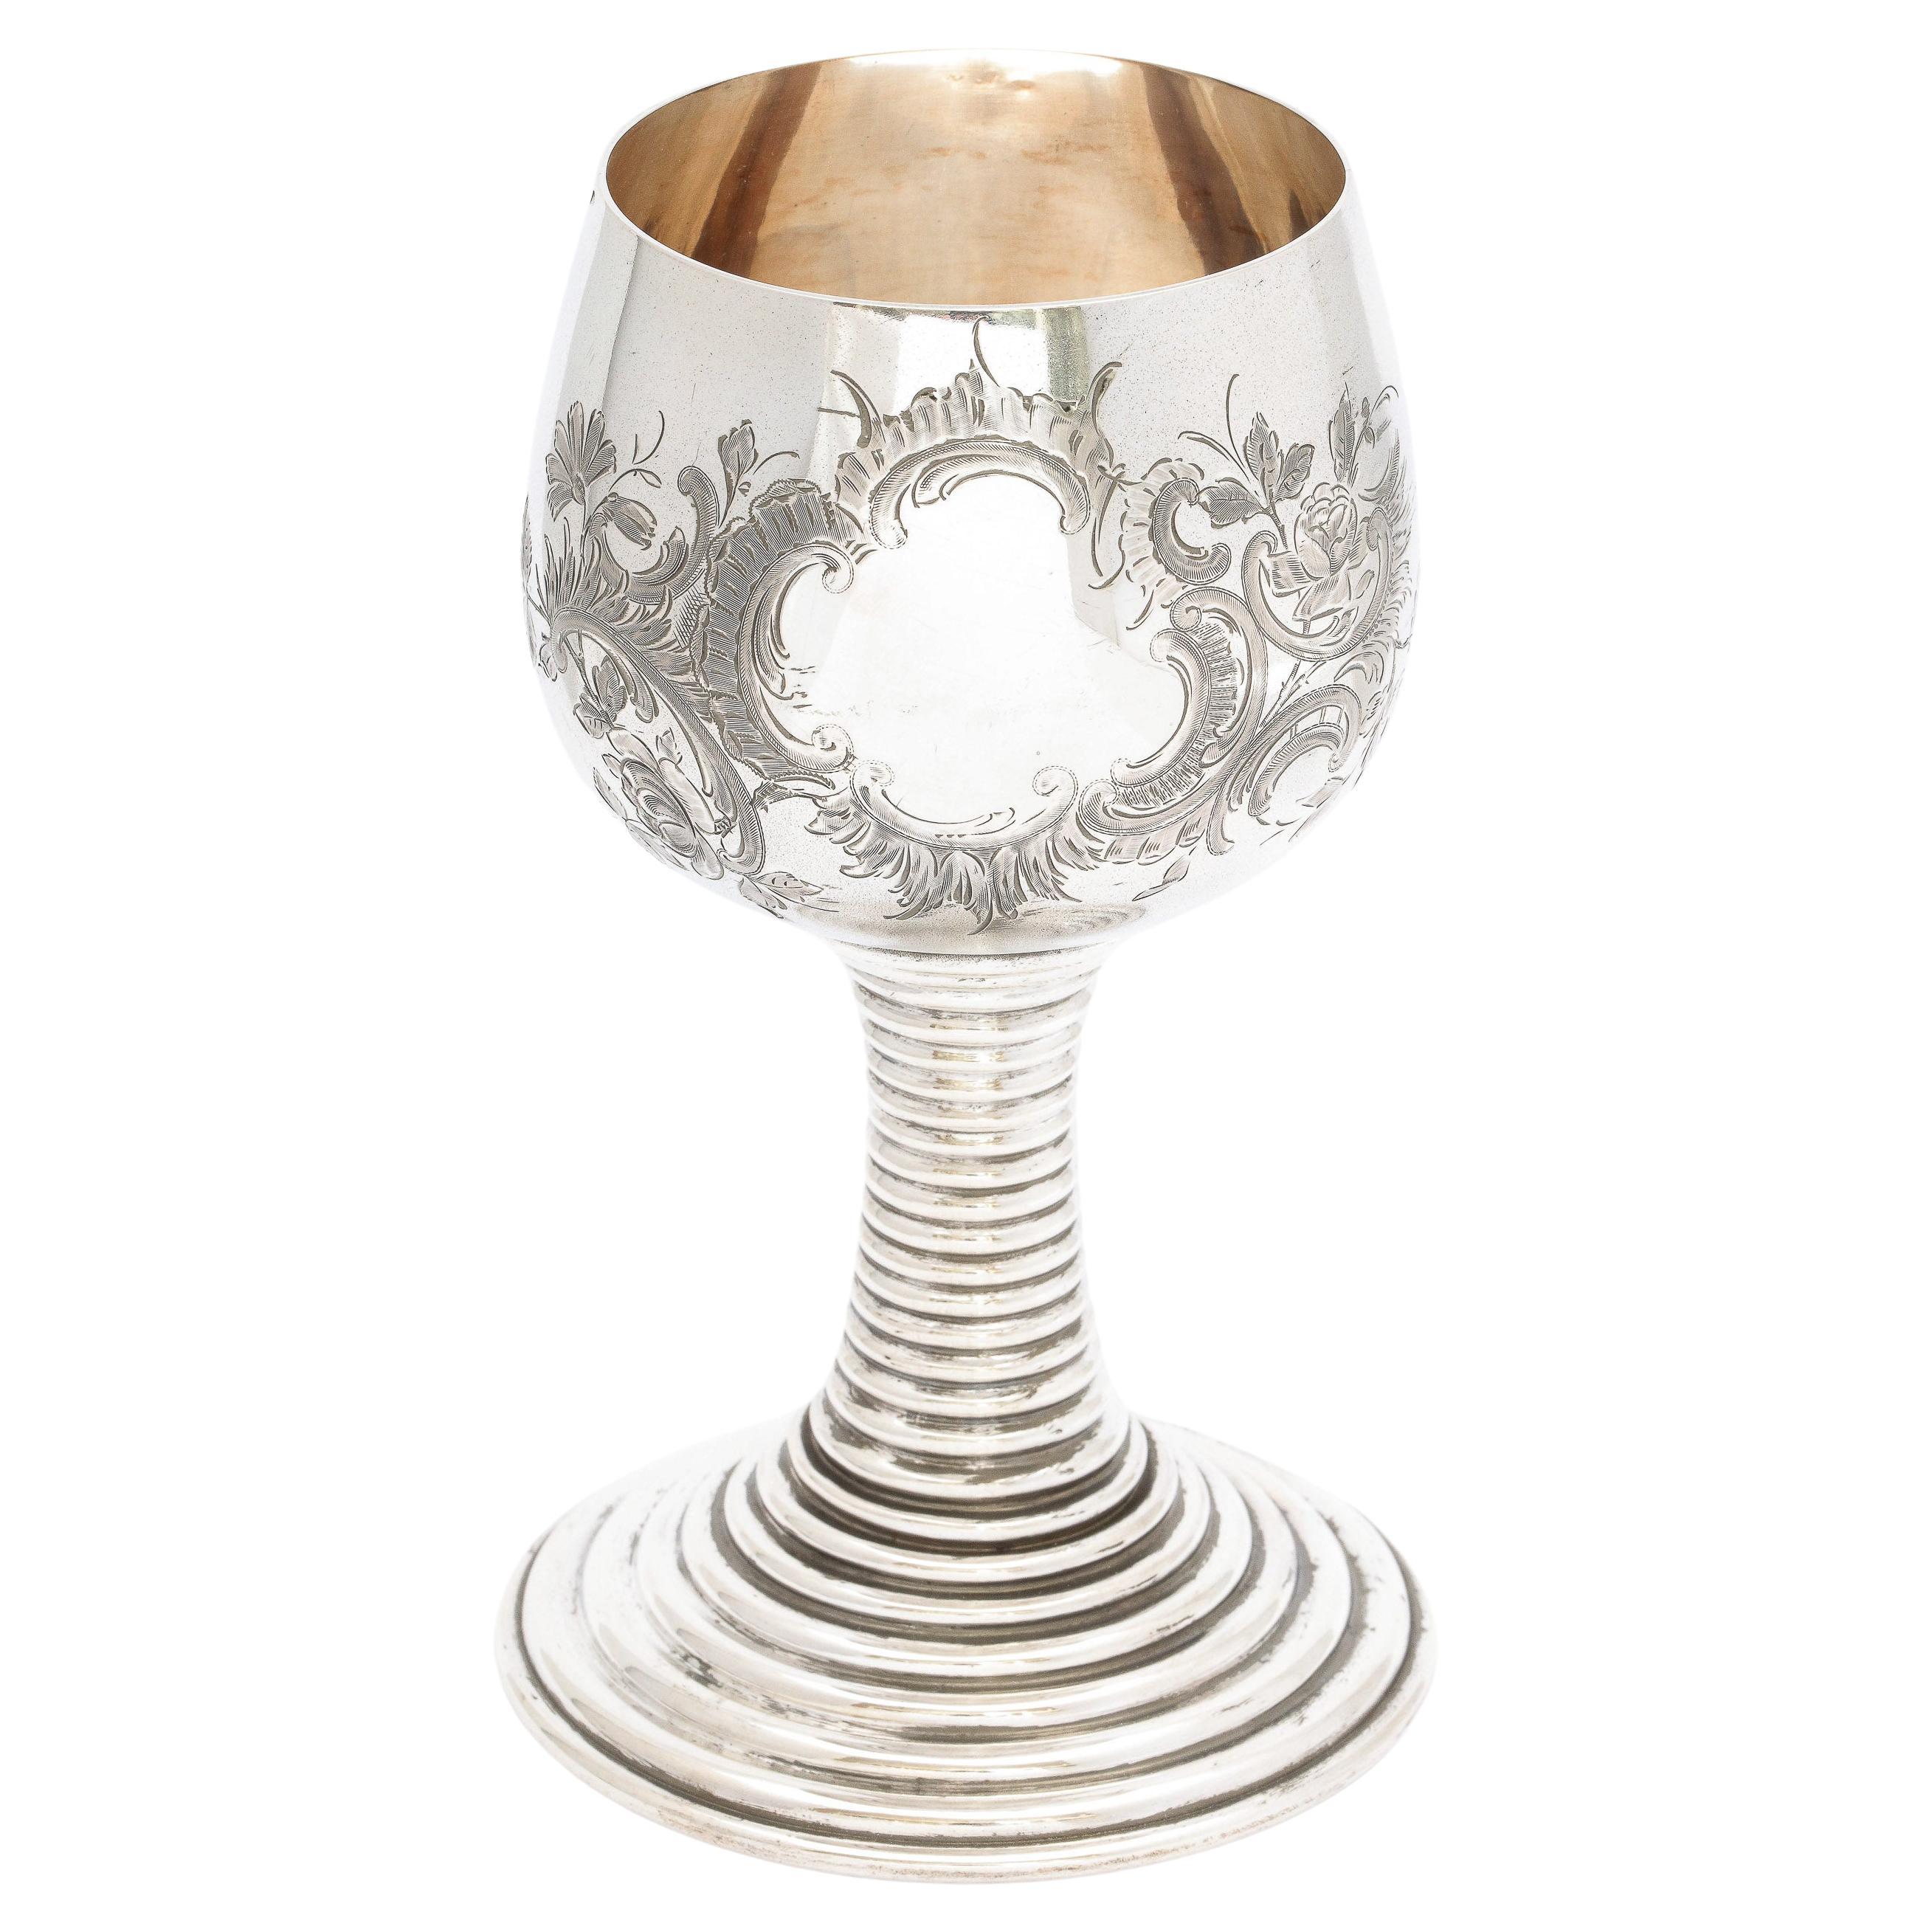 Medieval/15th Century-Style Continental Silver '.800' Roemer/ Rummer Goblet For Sale